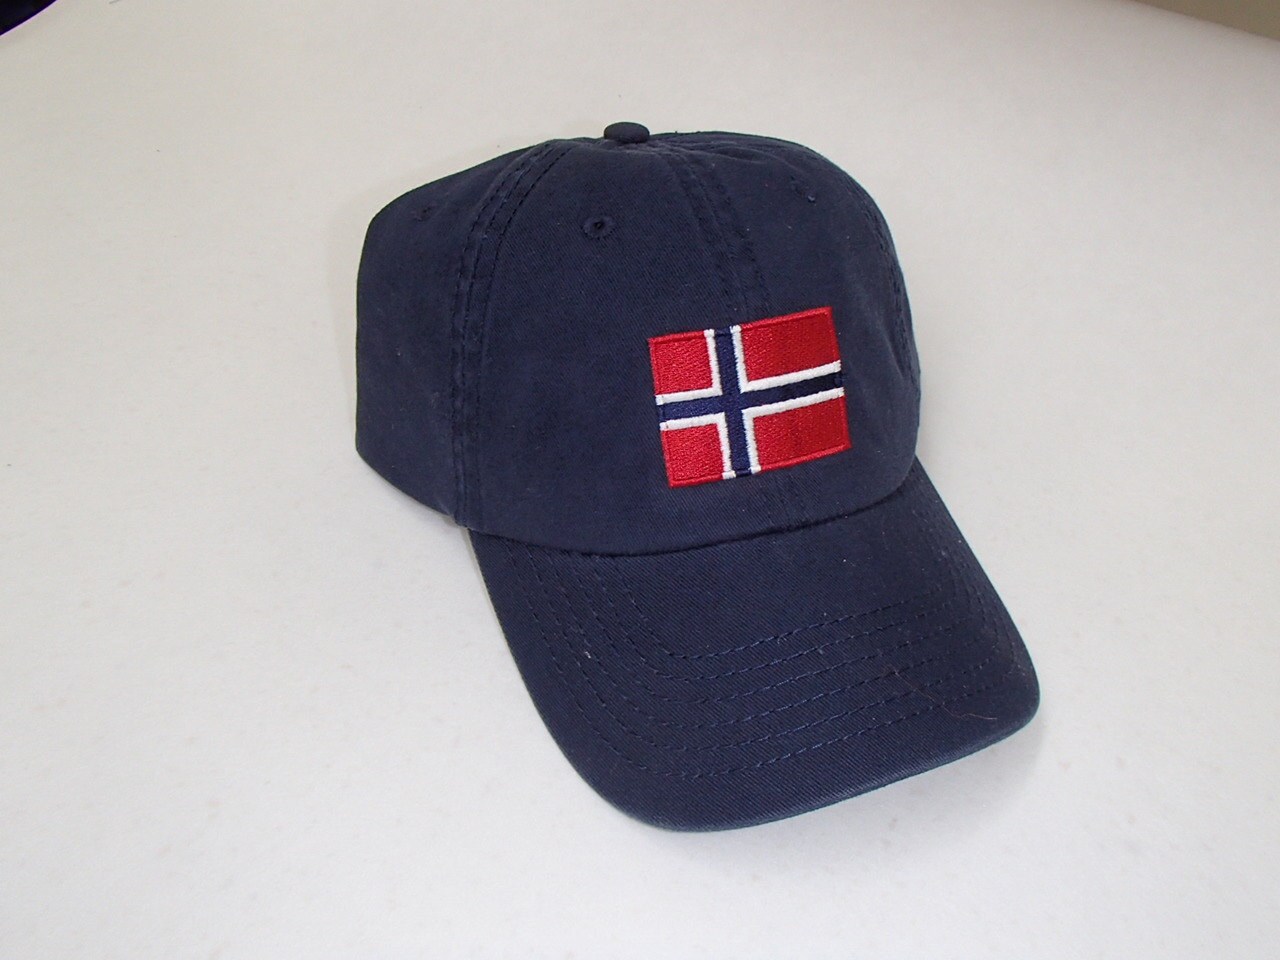 Embroidered Navy Baseball Cap Hat With Scandinavian Flags | Etsy